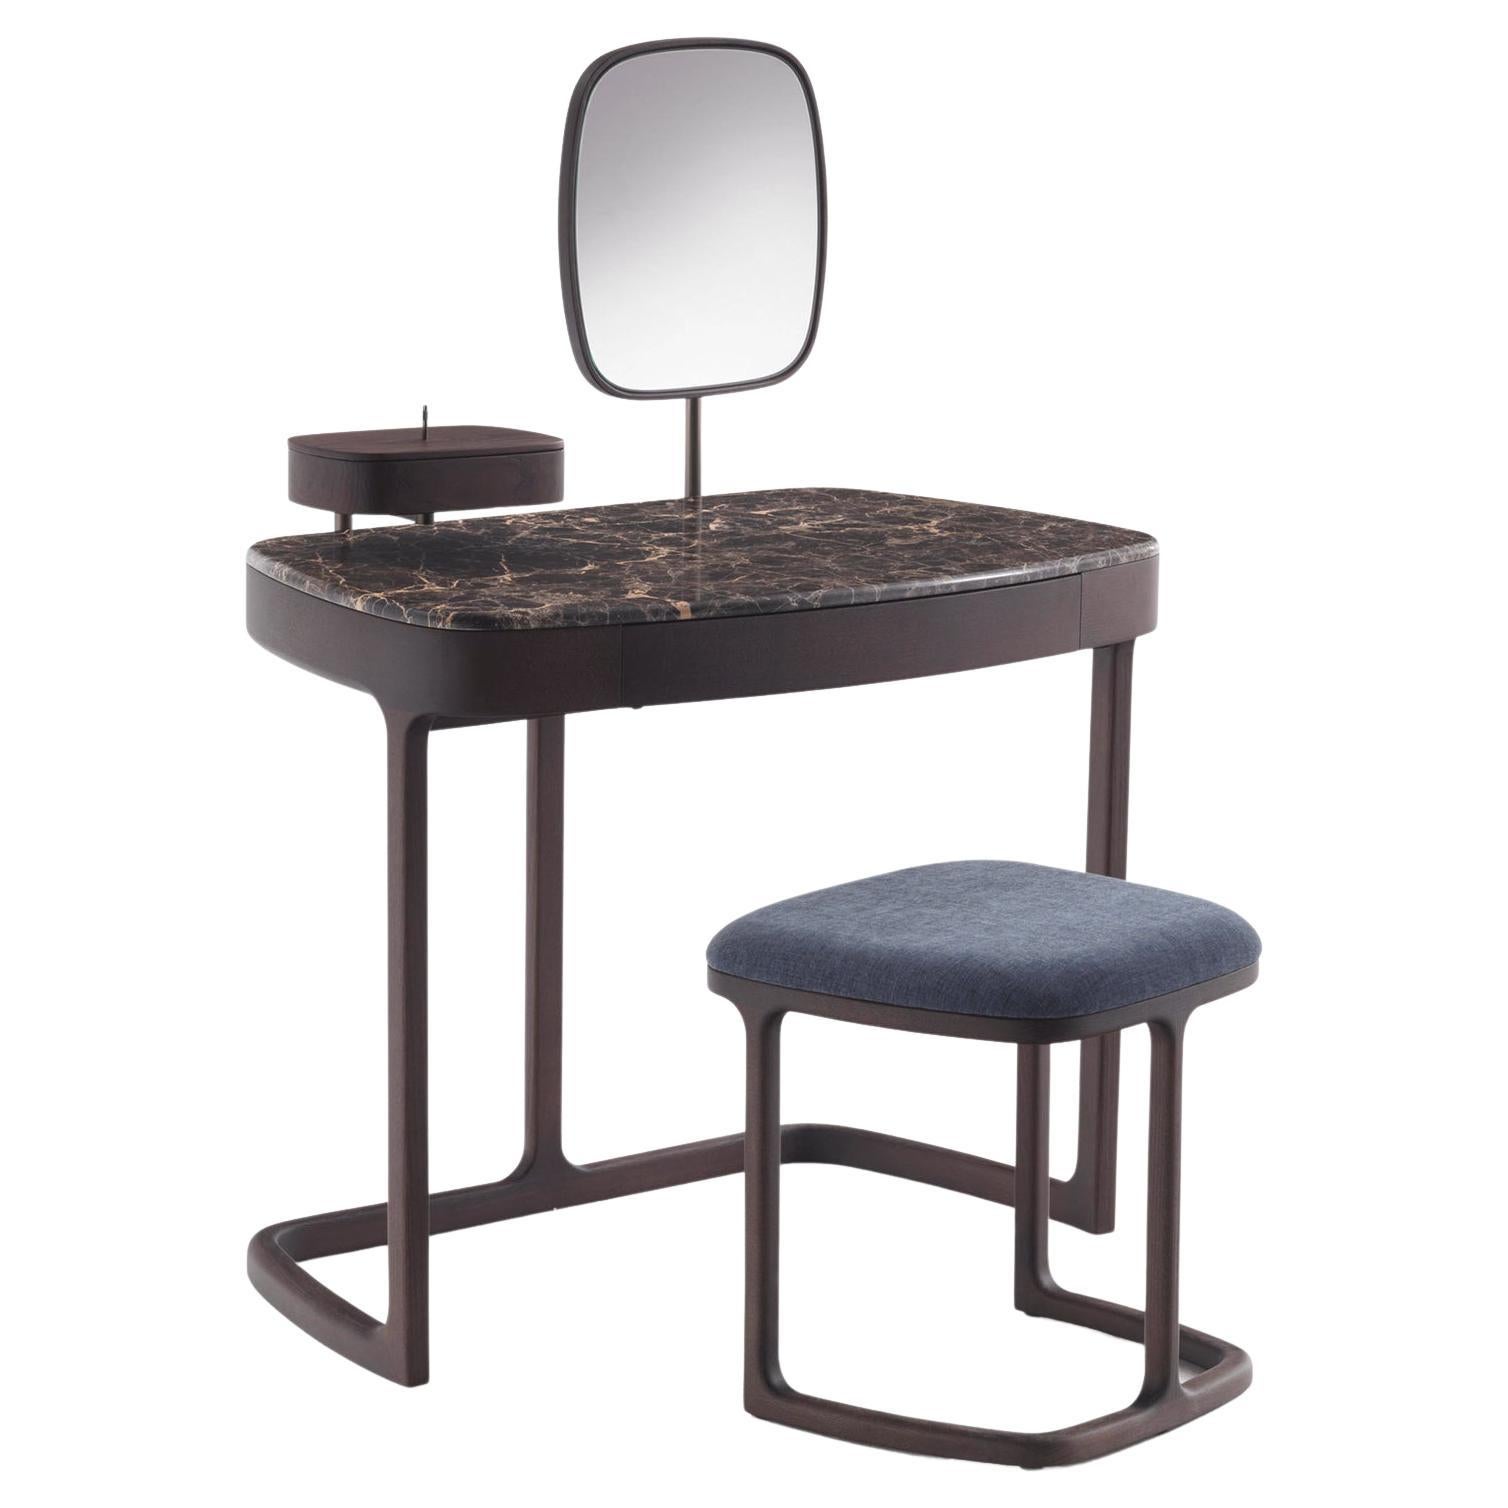 Make-Up Ash Stained Set Coiffeuse and Stool